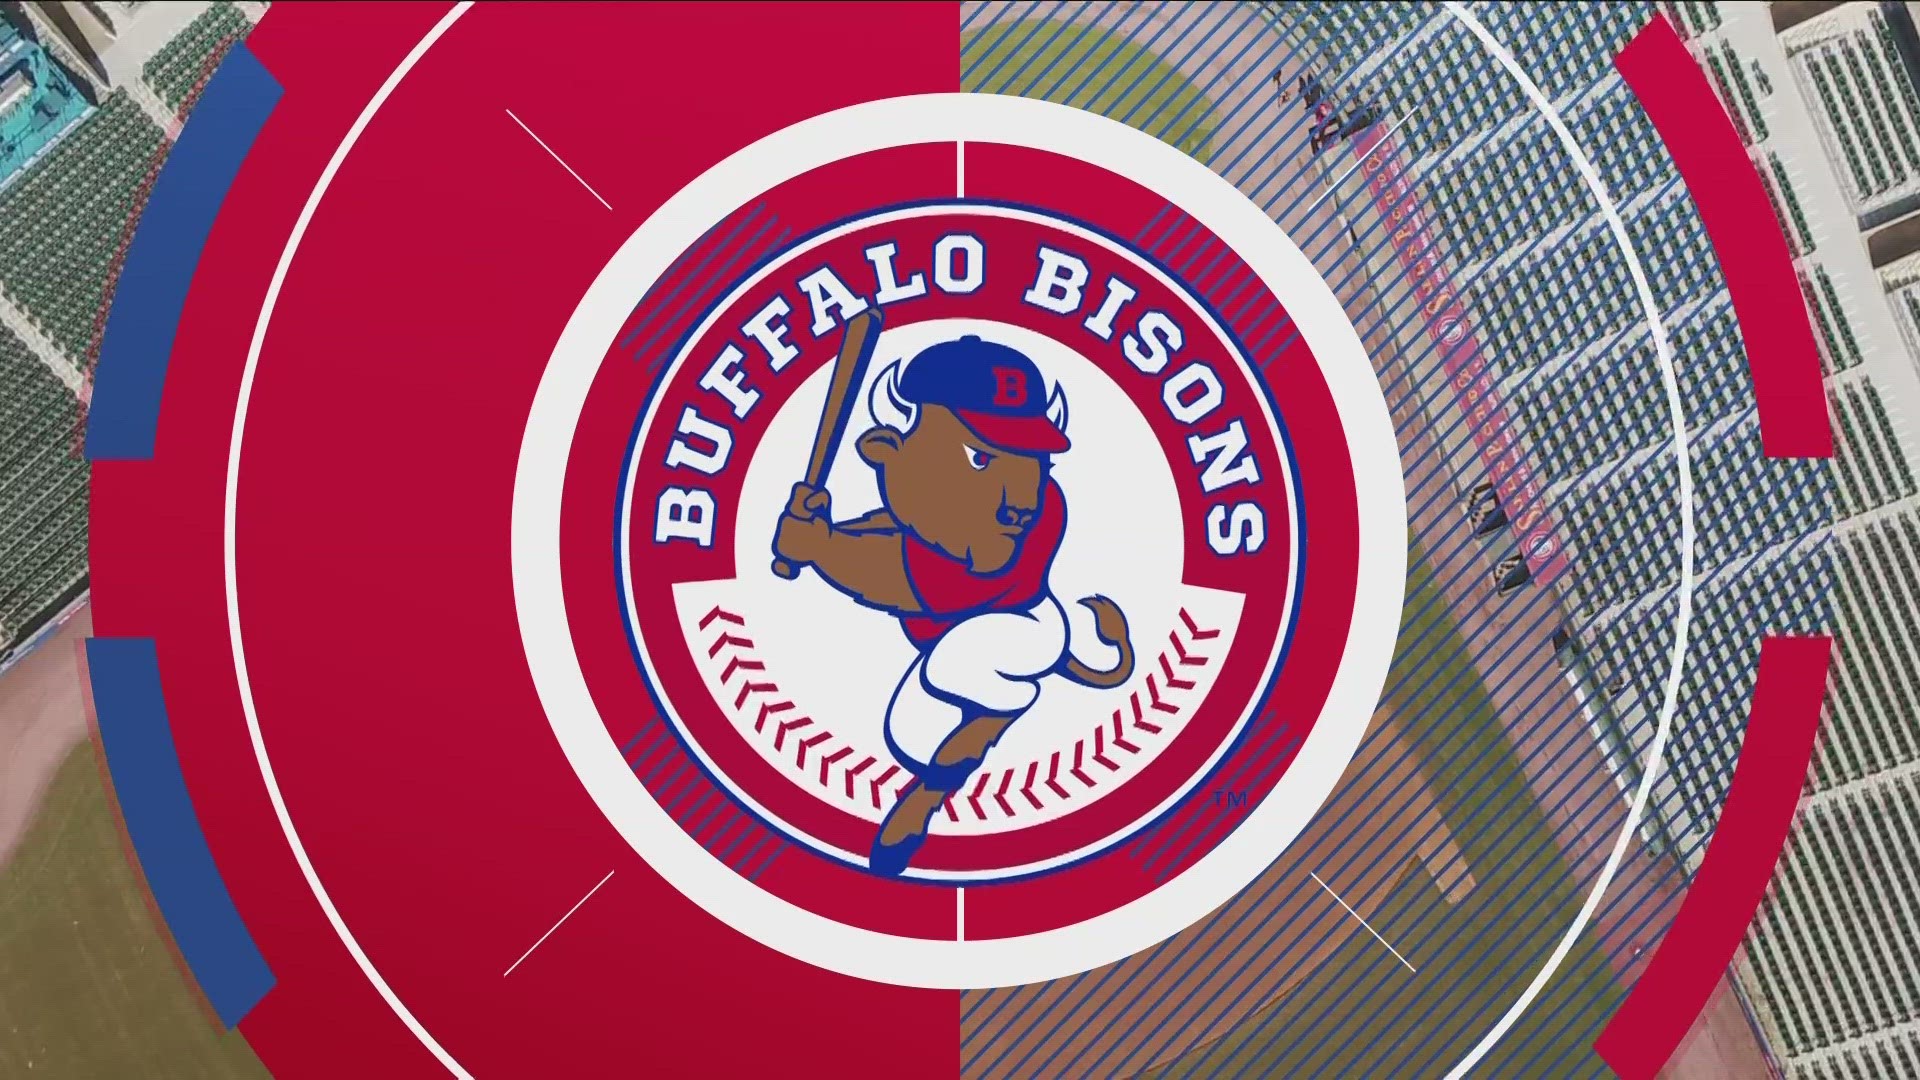 Bisons opening day next Friday, what's new at the ball park